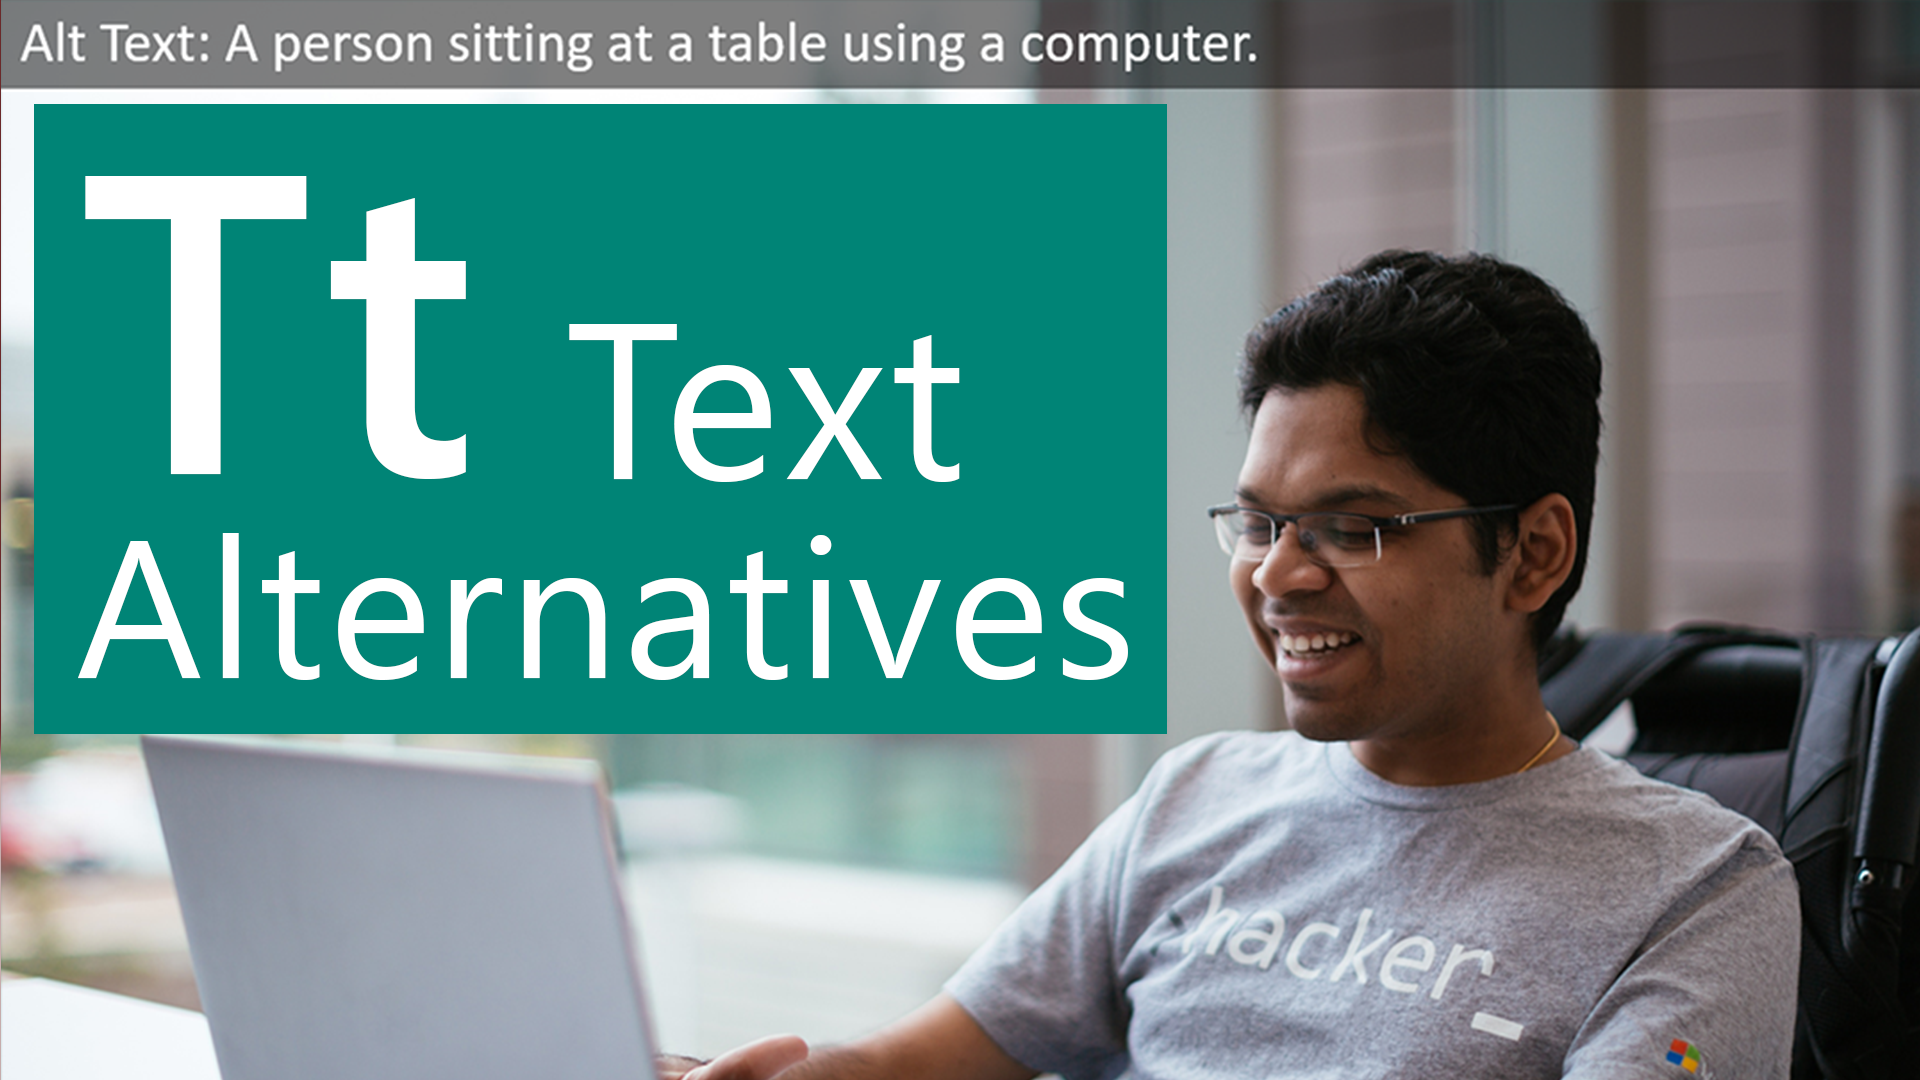 T is for Text Alternatives. Pratyush Nalam, a man who uses a wheelchair, types on a laptop.